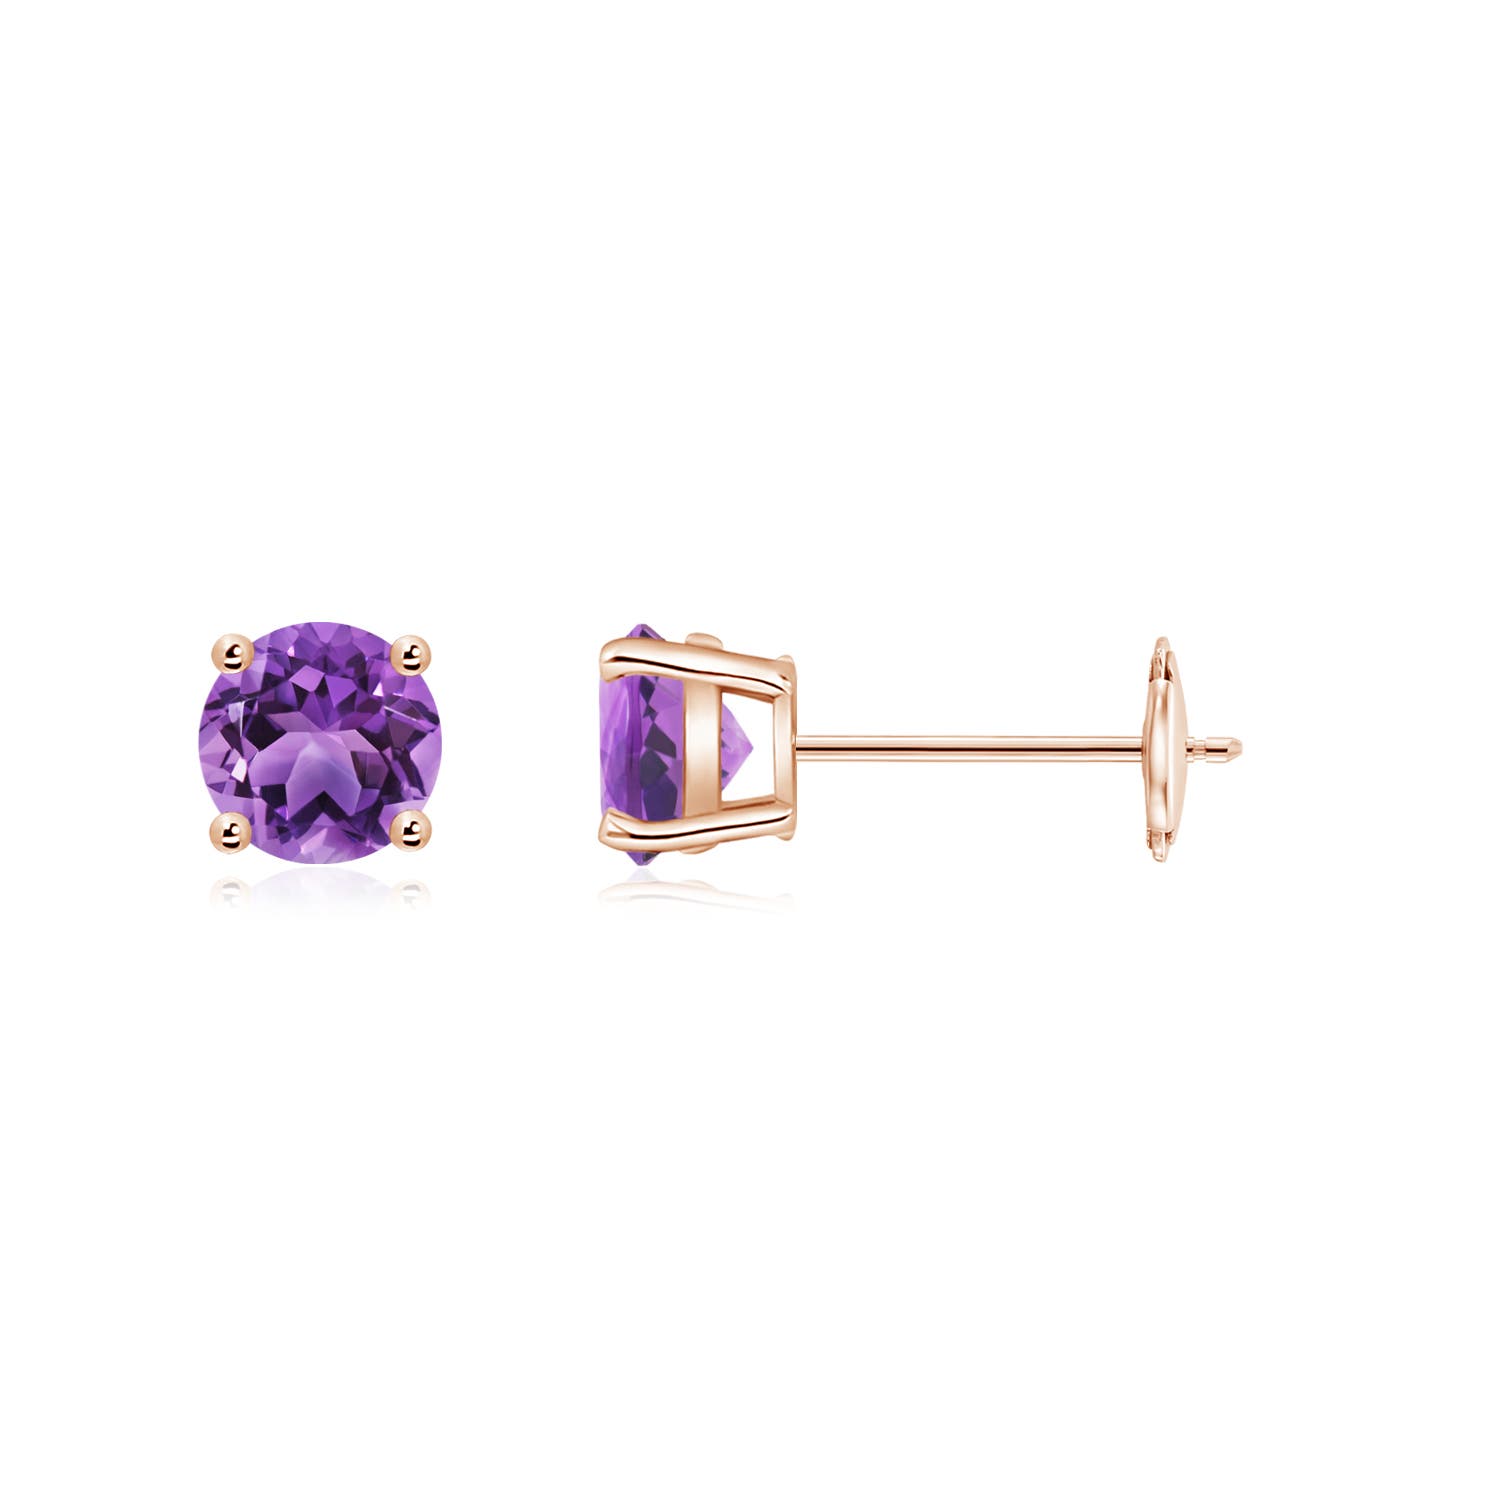 AA - Amethyst / 0.9 CT / 14 KT Rose Gold